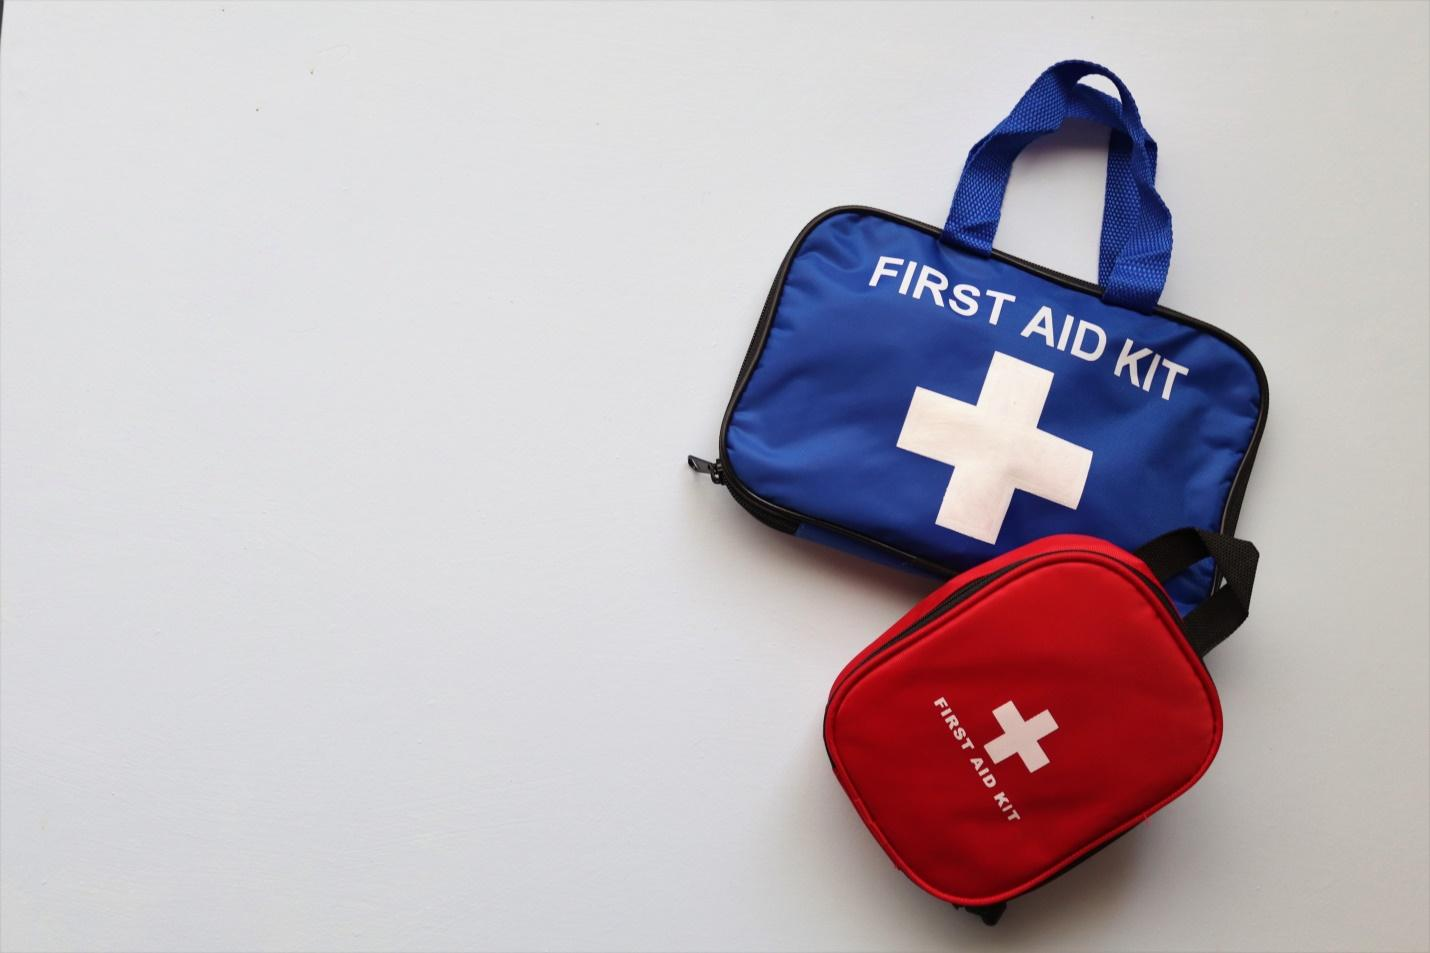 Occupational First Aid Courses: BC Businesses and First Aid Provisions Image description: two first aid kits on white background